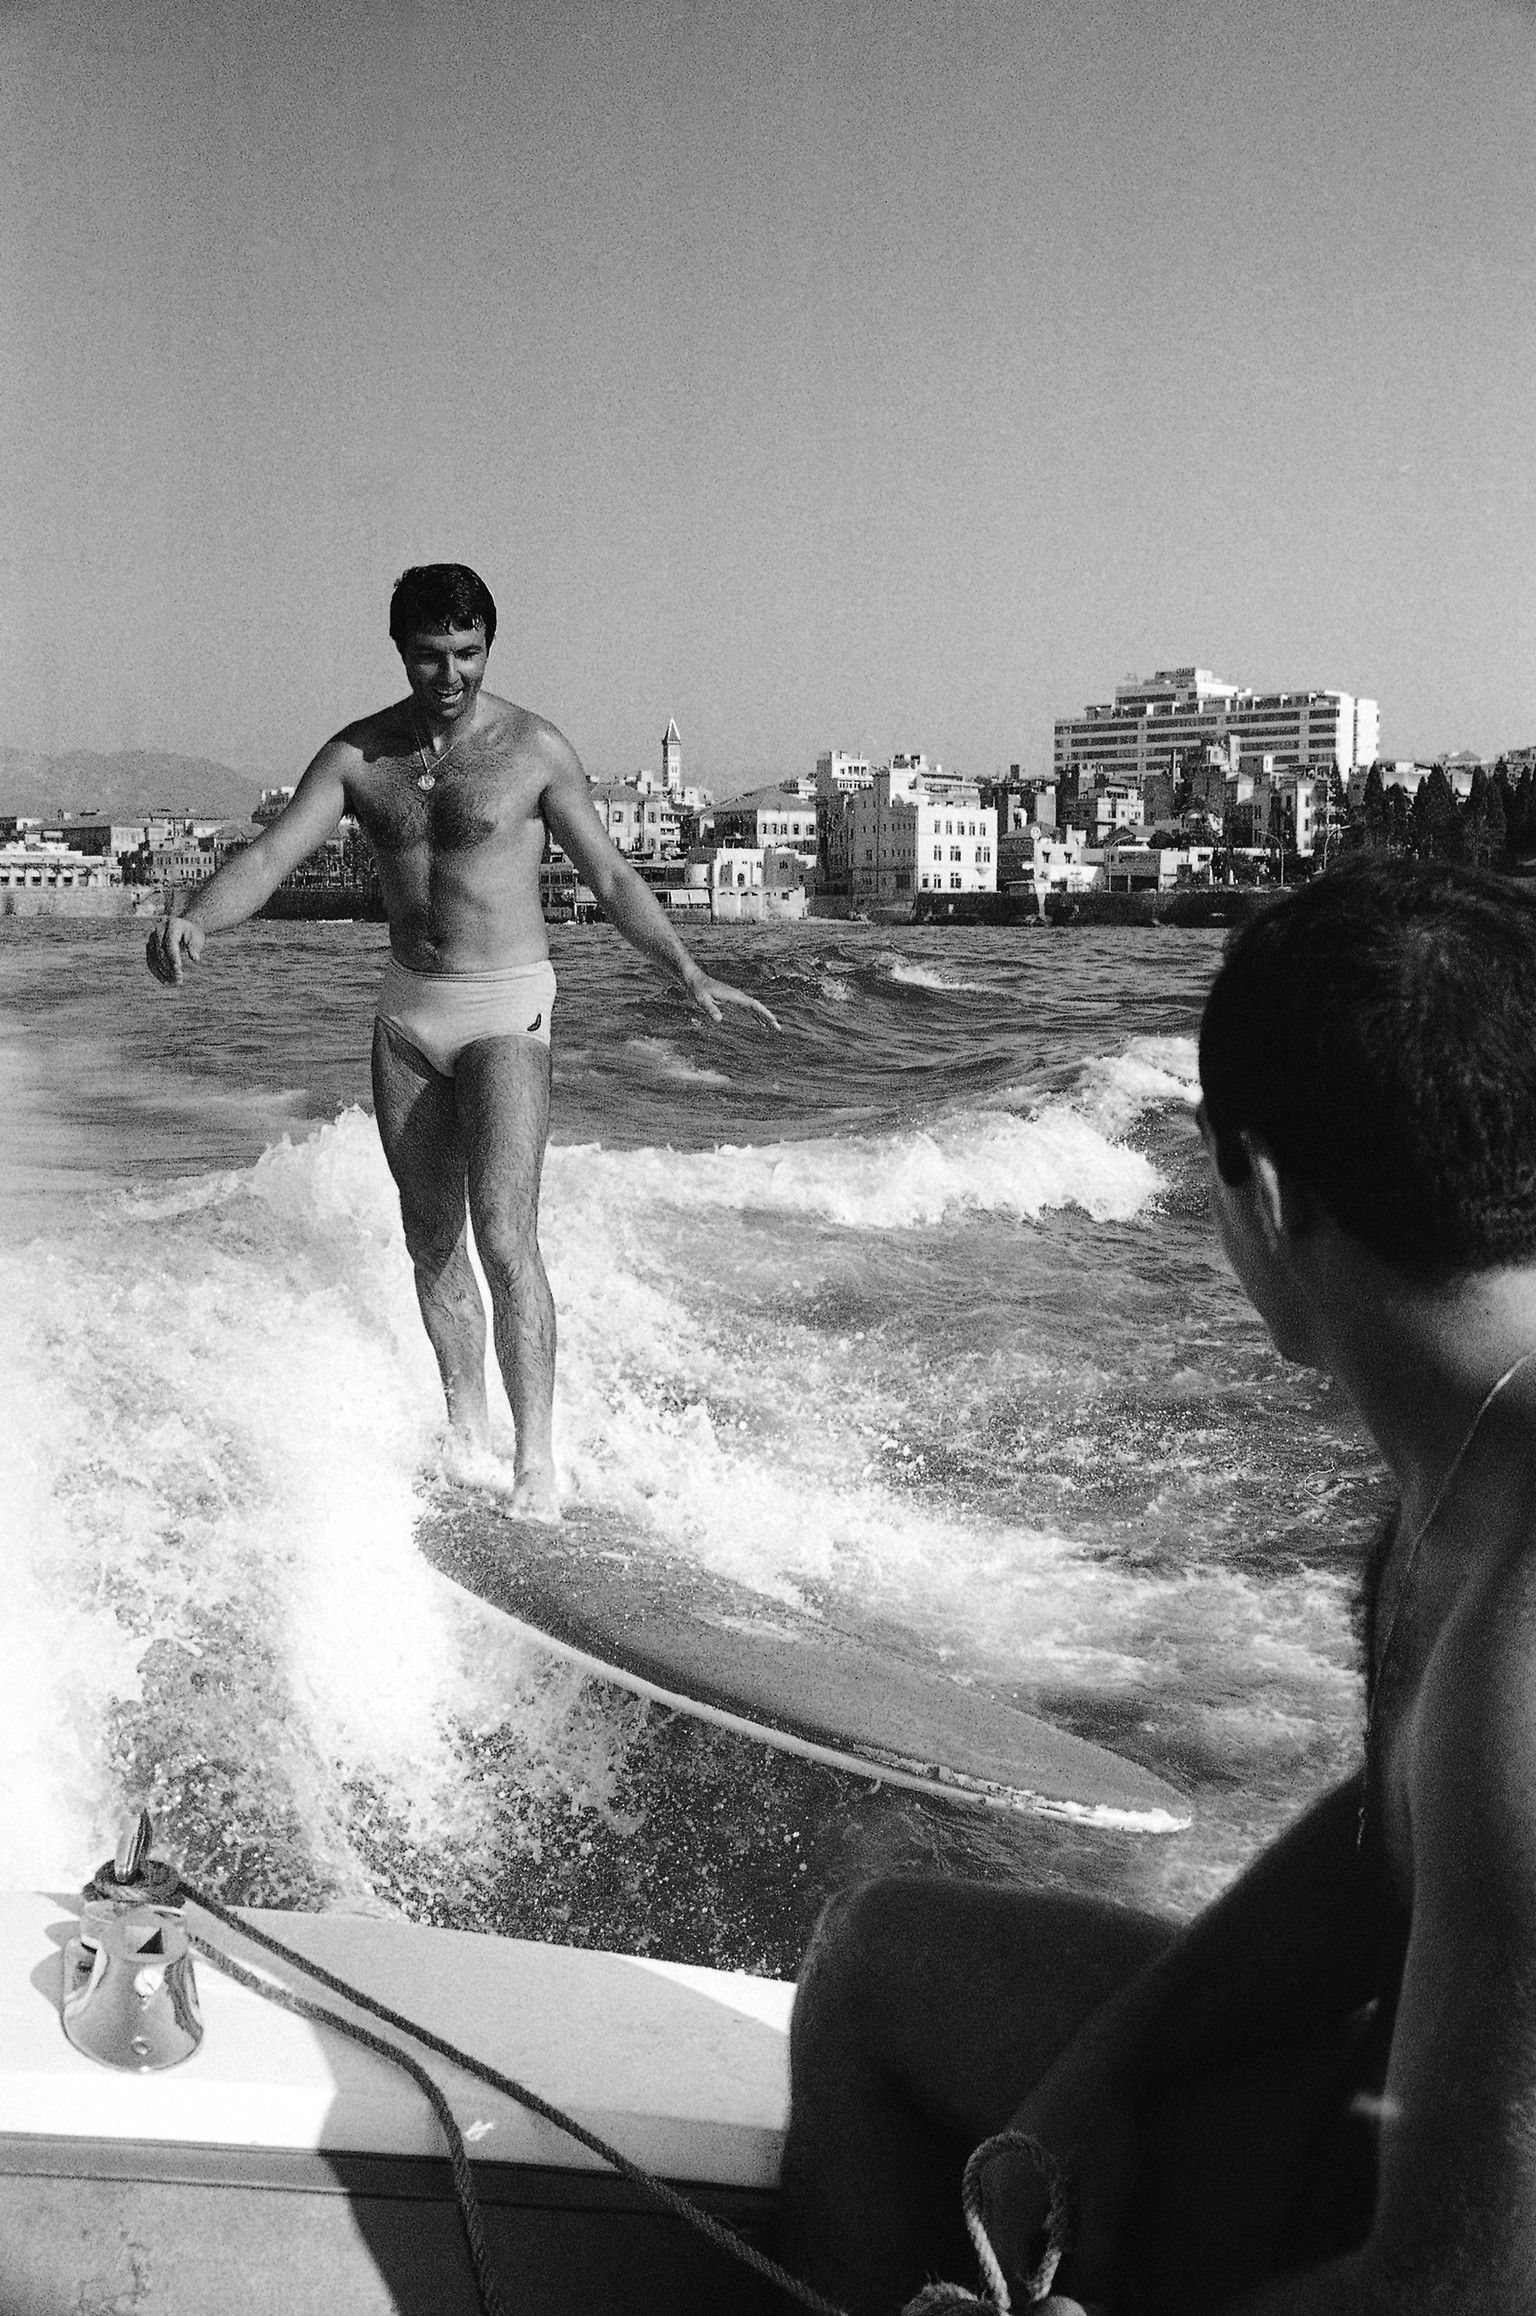 Eddy Arida, a young Lebanese executive surfing off the Mediterranean coast of Beirut, Lebanon on August 25, 1965. Instead of riding the waves, Arida rides the wake of a speedboat, like a water-skier w ...